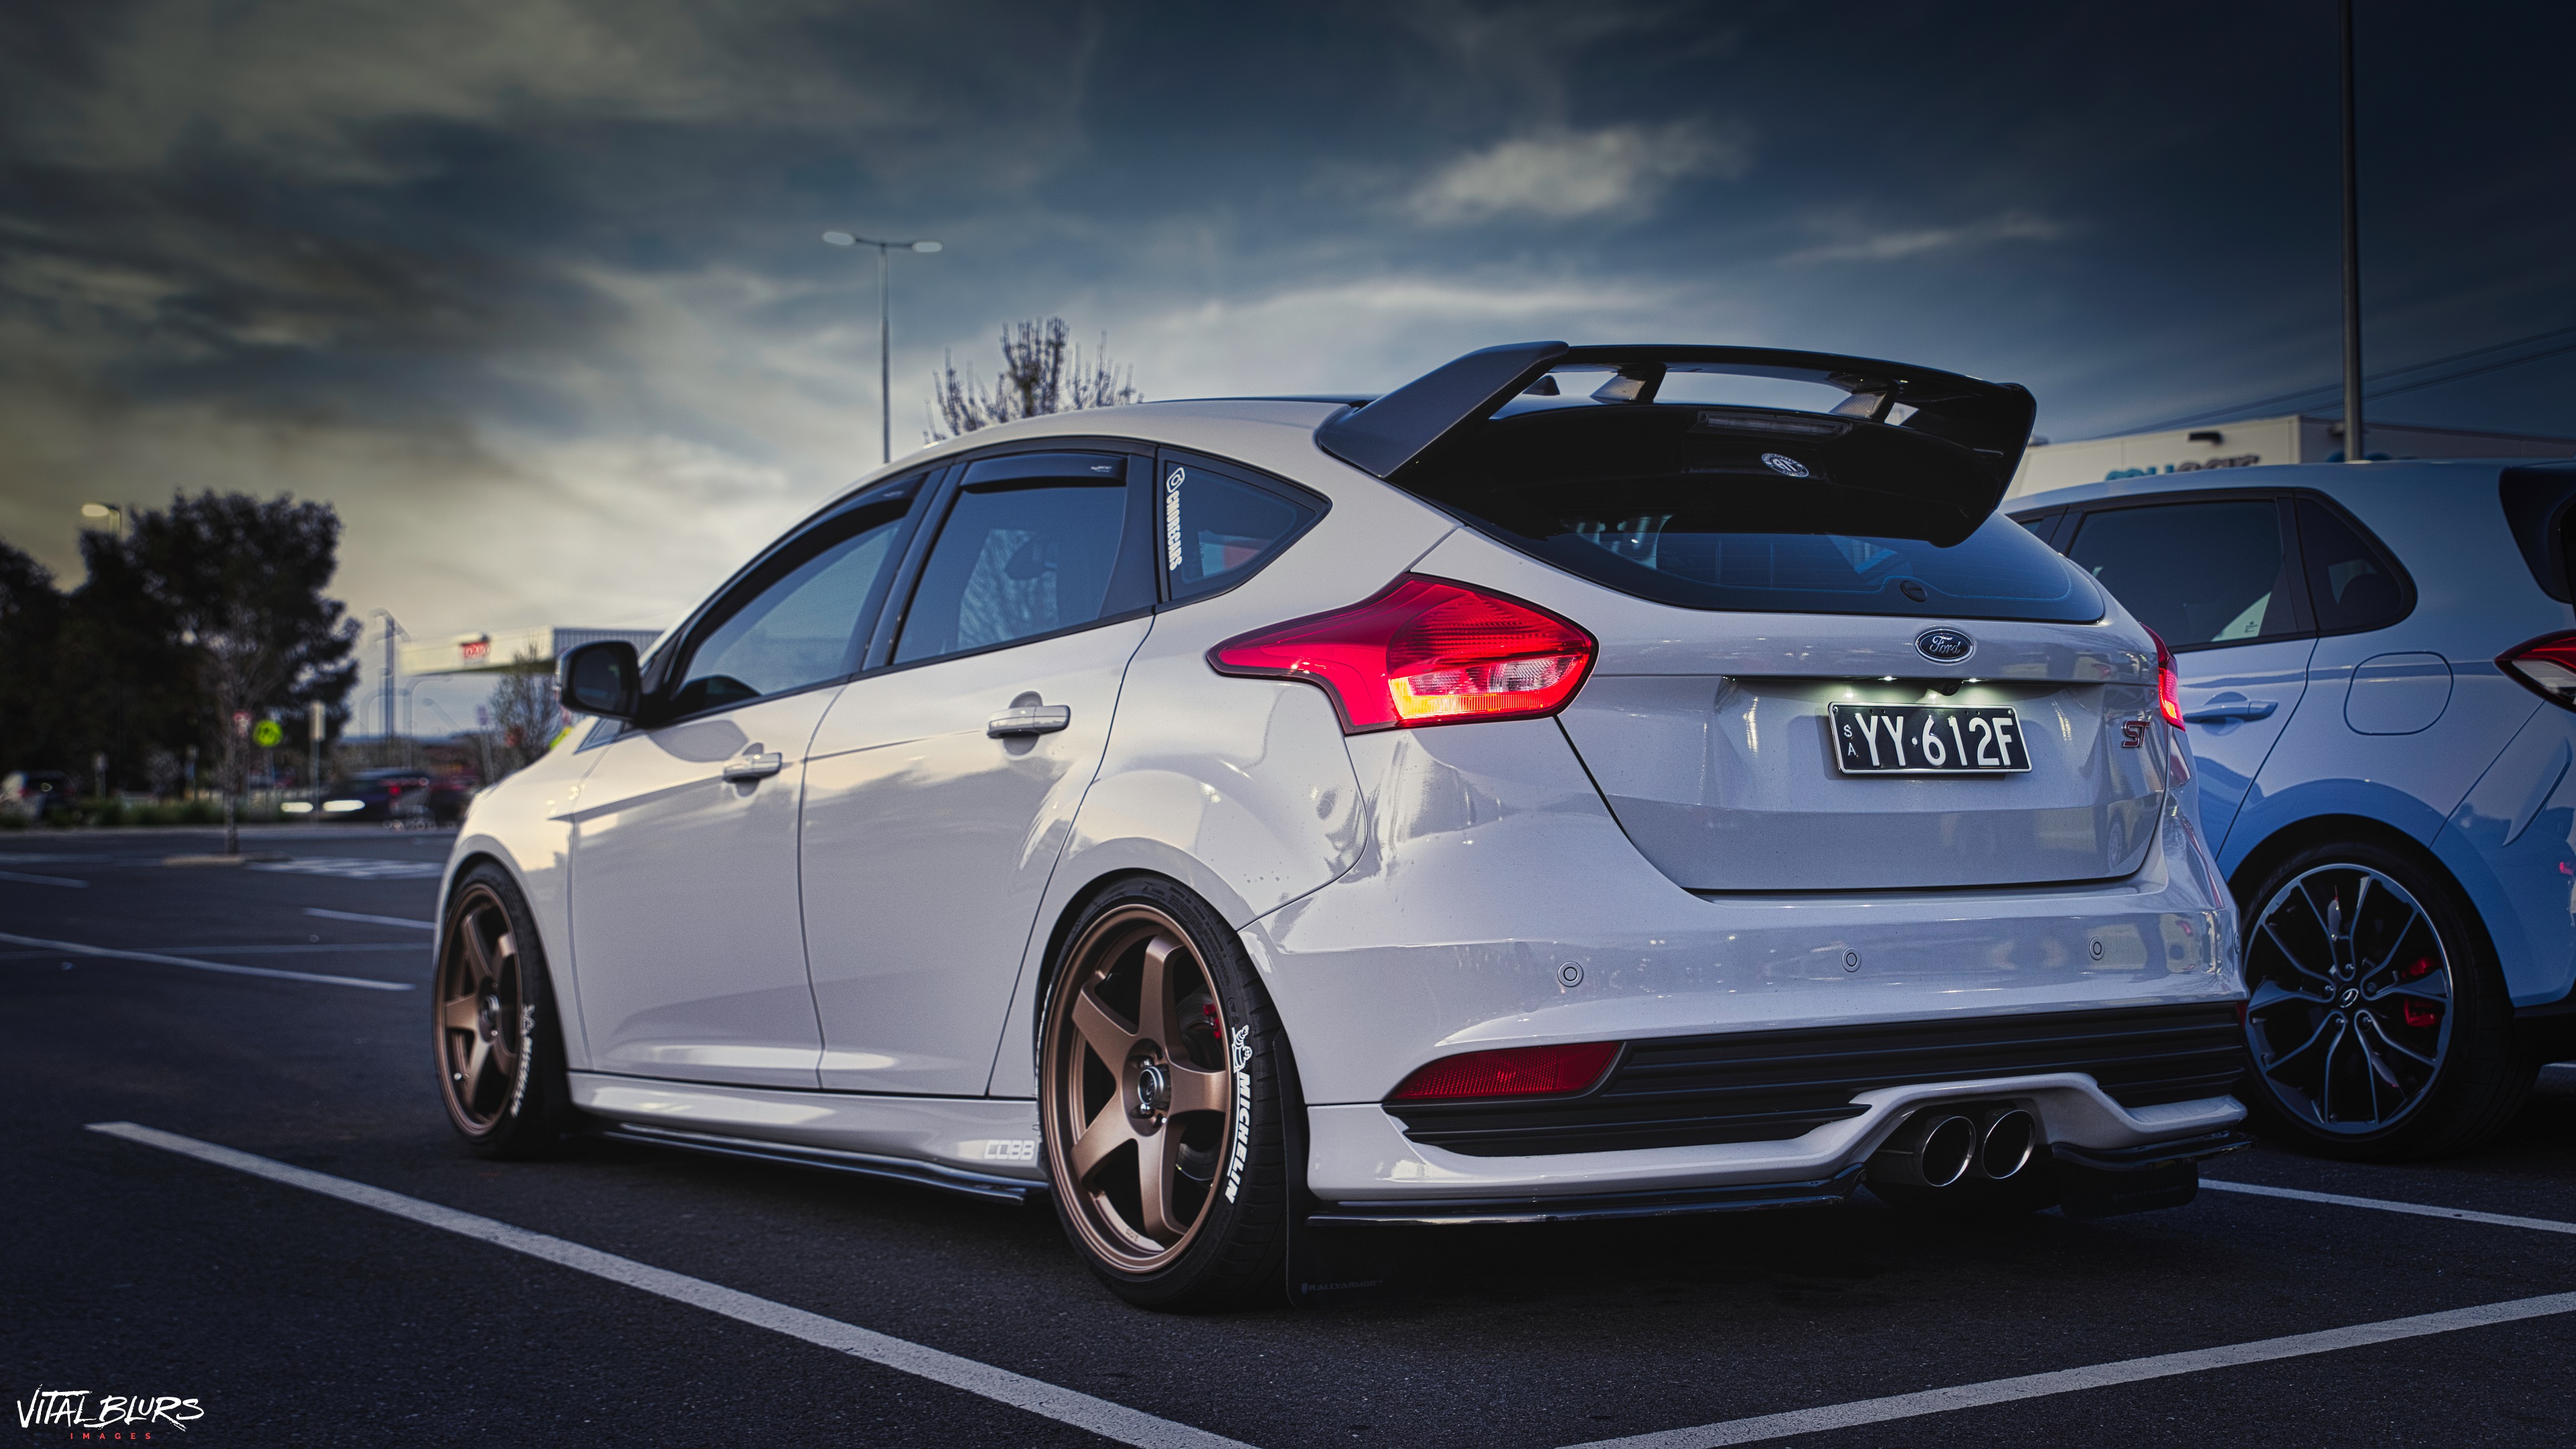 General 3840x2160 Ford car vehicle outdoors car park sky clouds Ford Focus ST gray cars colored wheels hatchbacks european cars sports car British cars